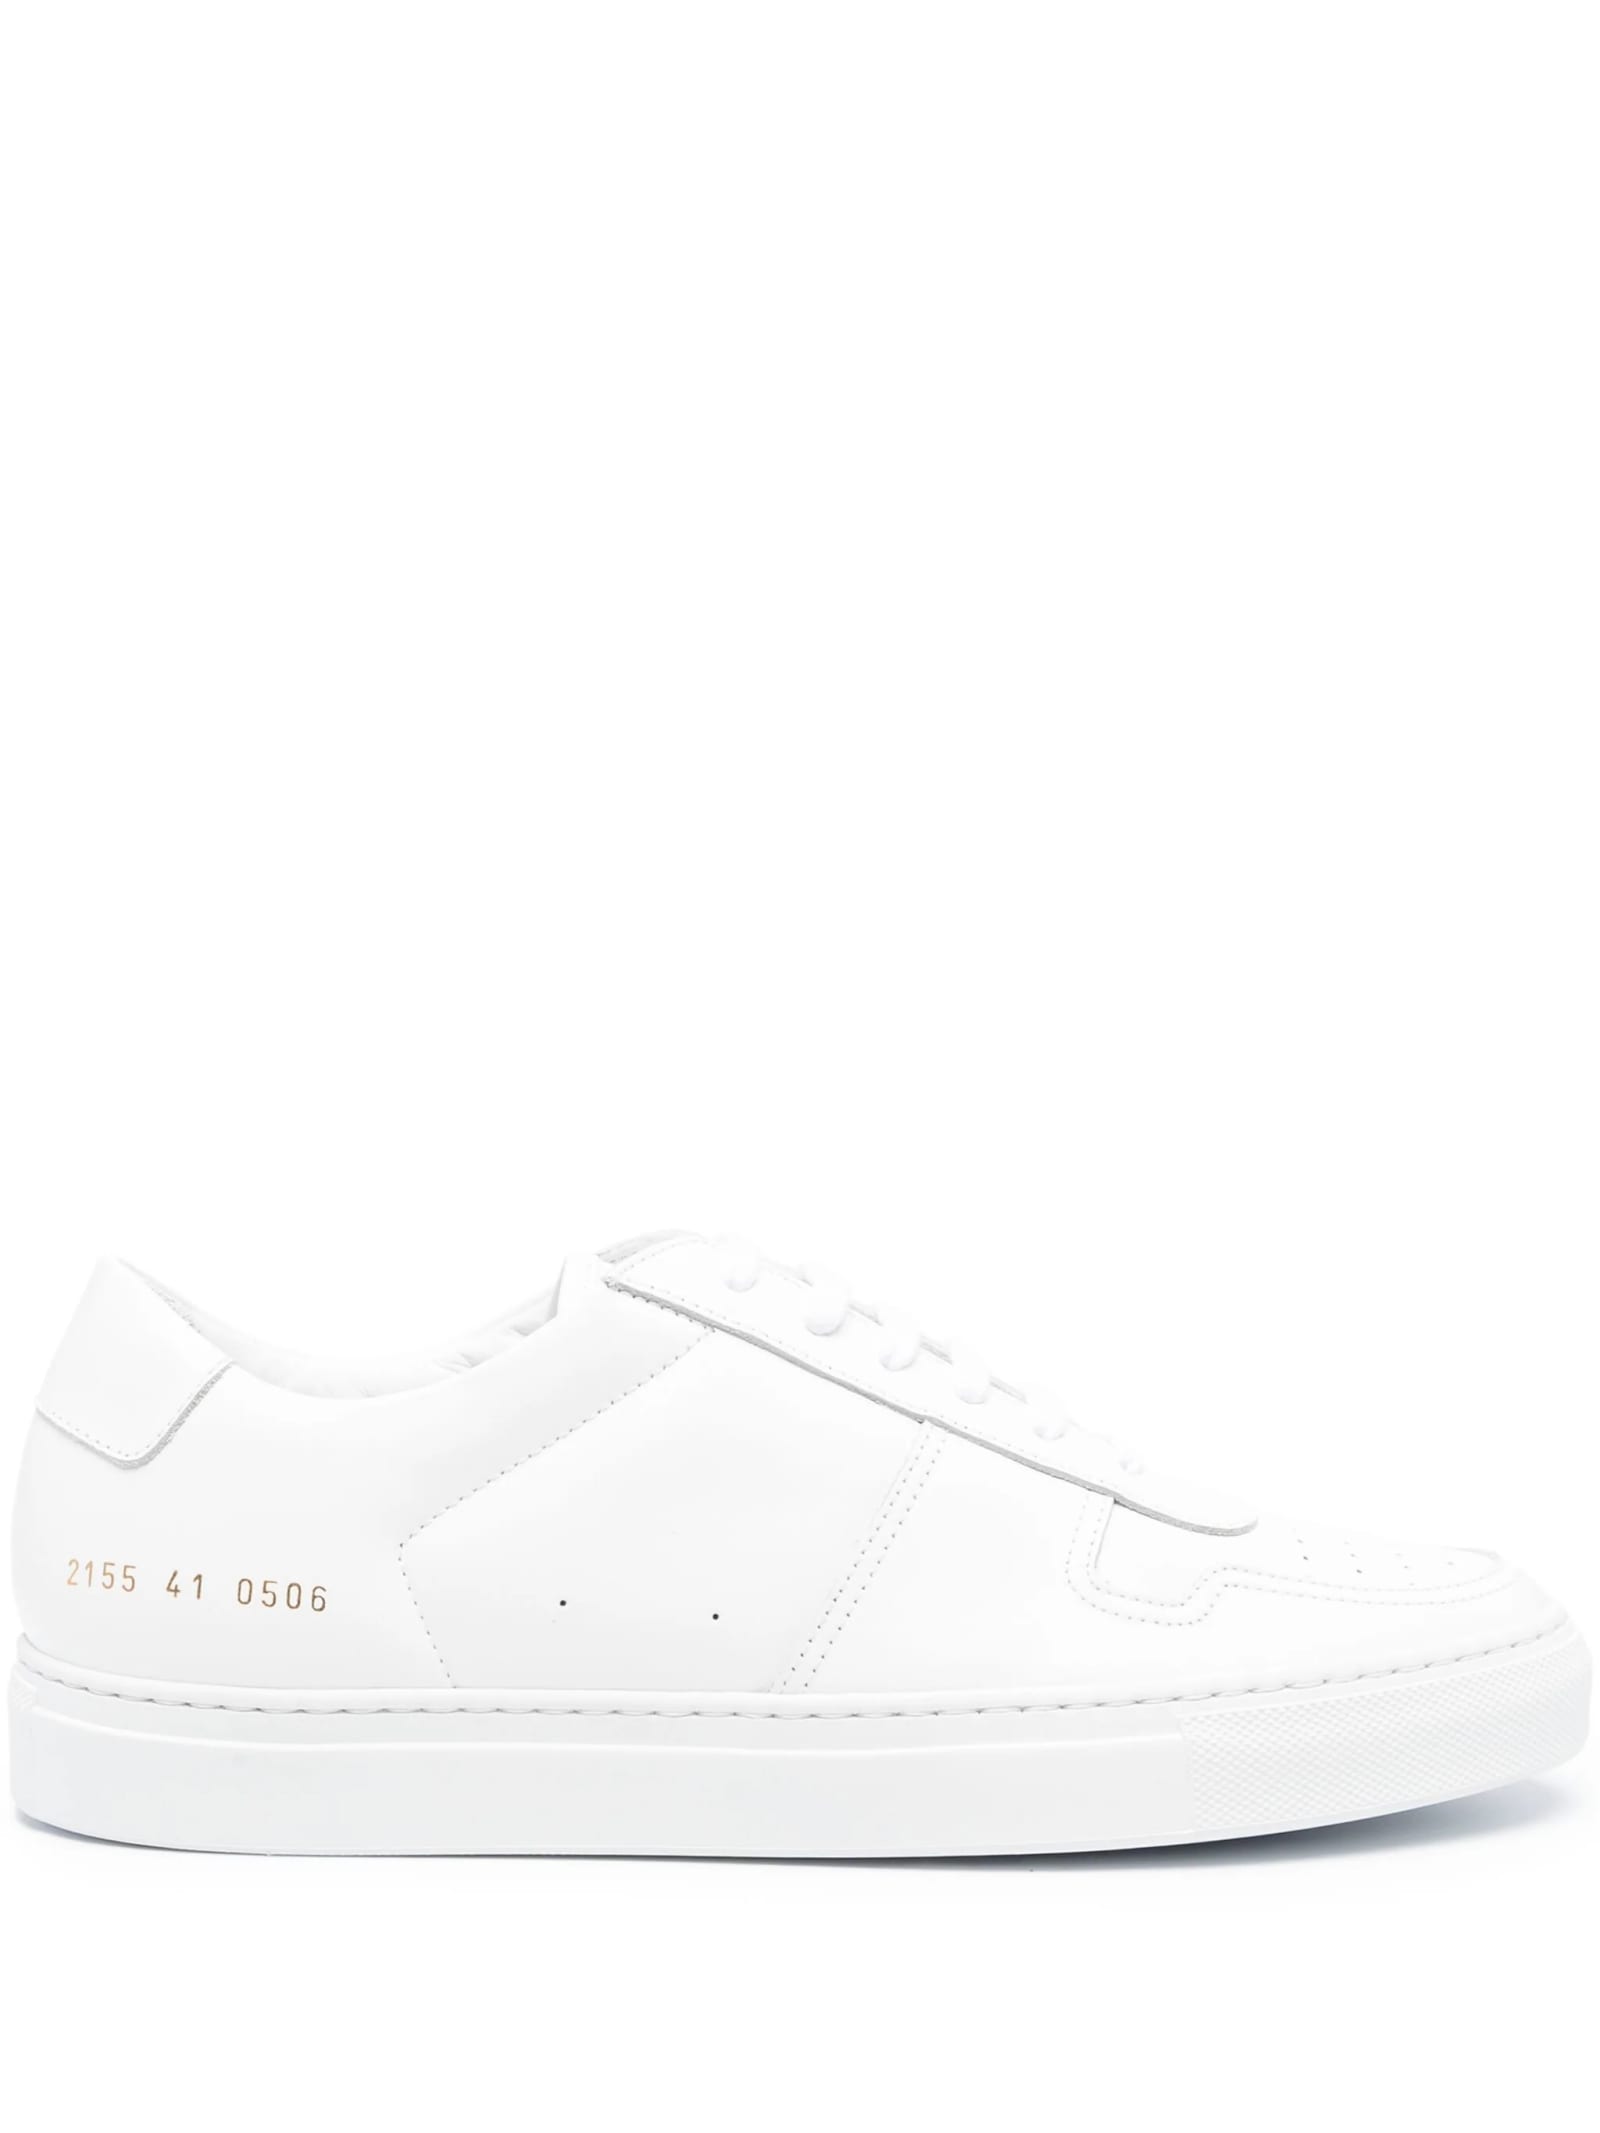 Common Projects Bball Low In Leather